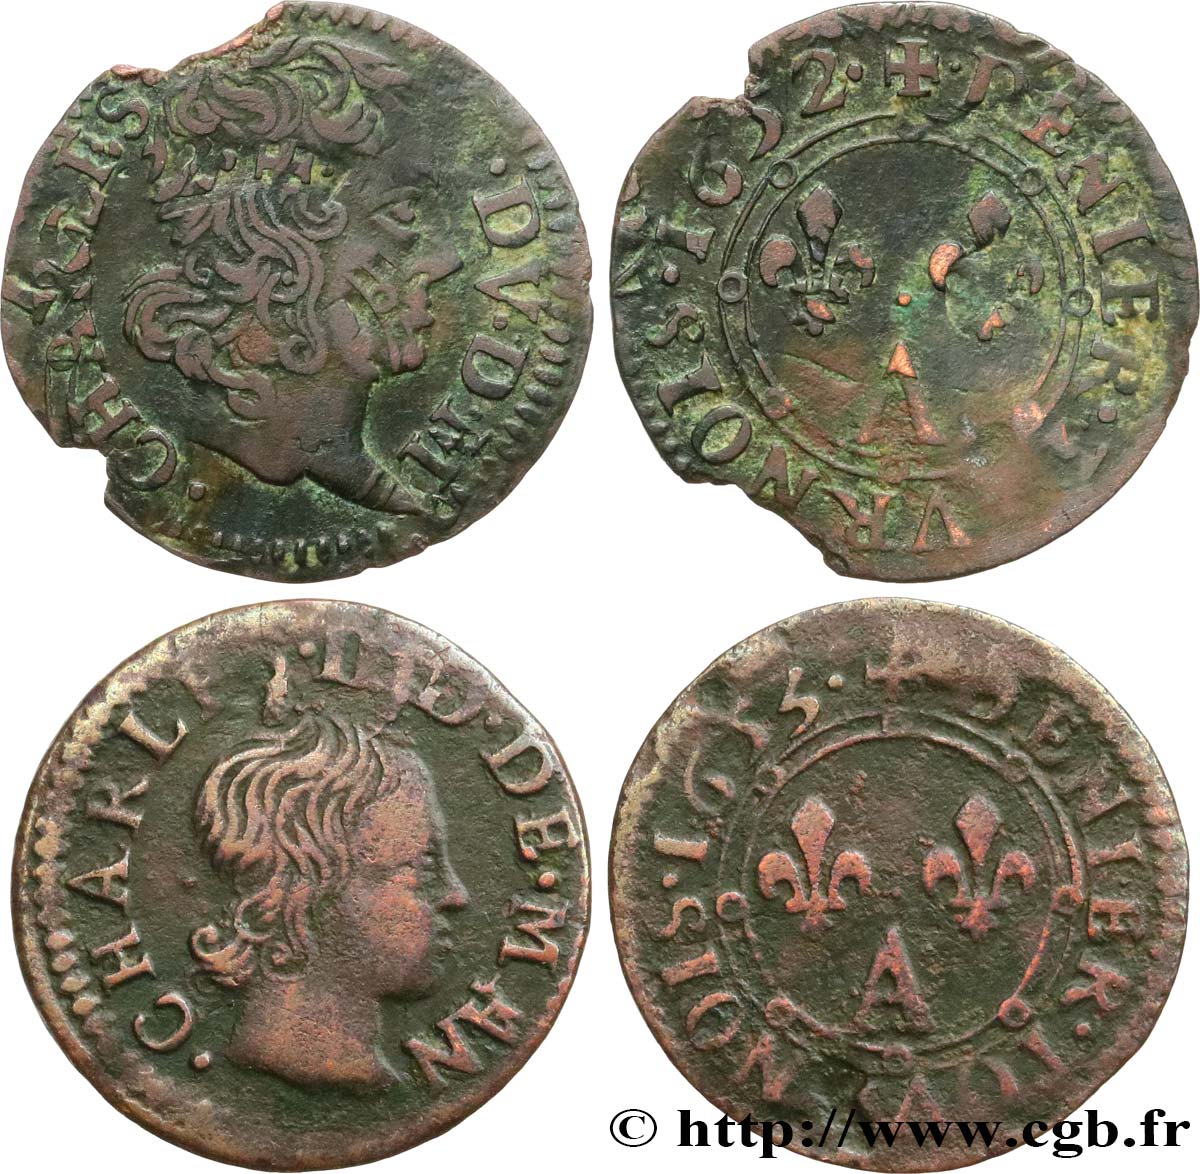 ARDENNES - PRINCIPALITY OF ARCHES-CHARLEVILLE - CHARLES II GONZAGA Lot de 2 deniers tournois VF